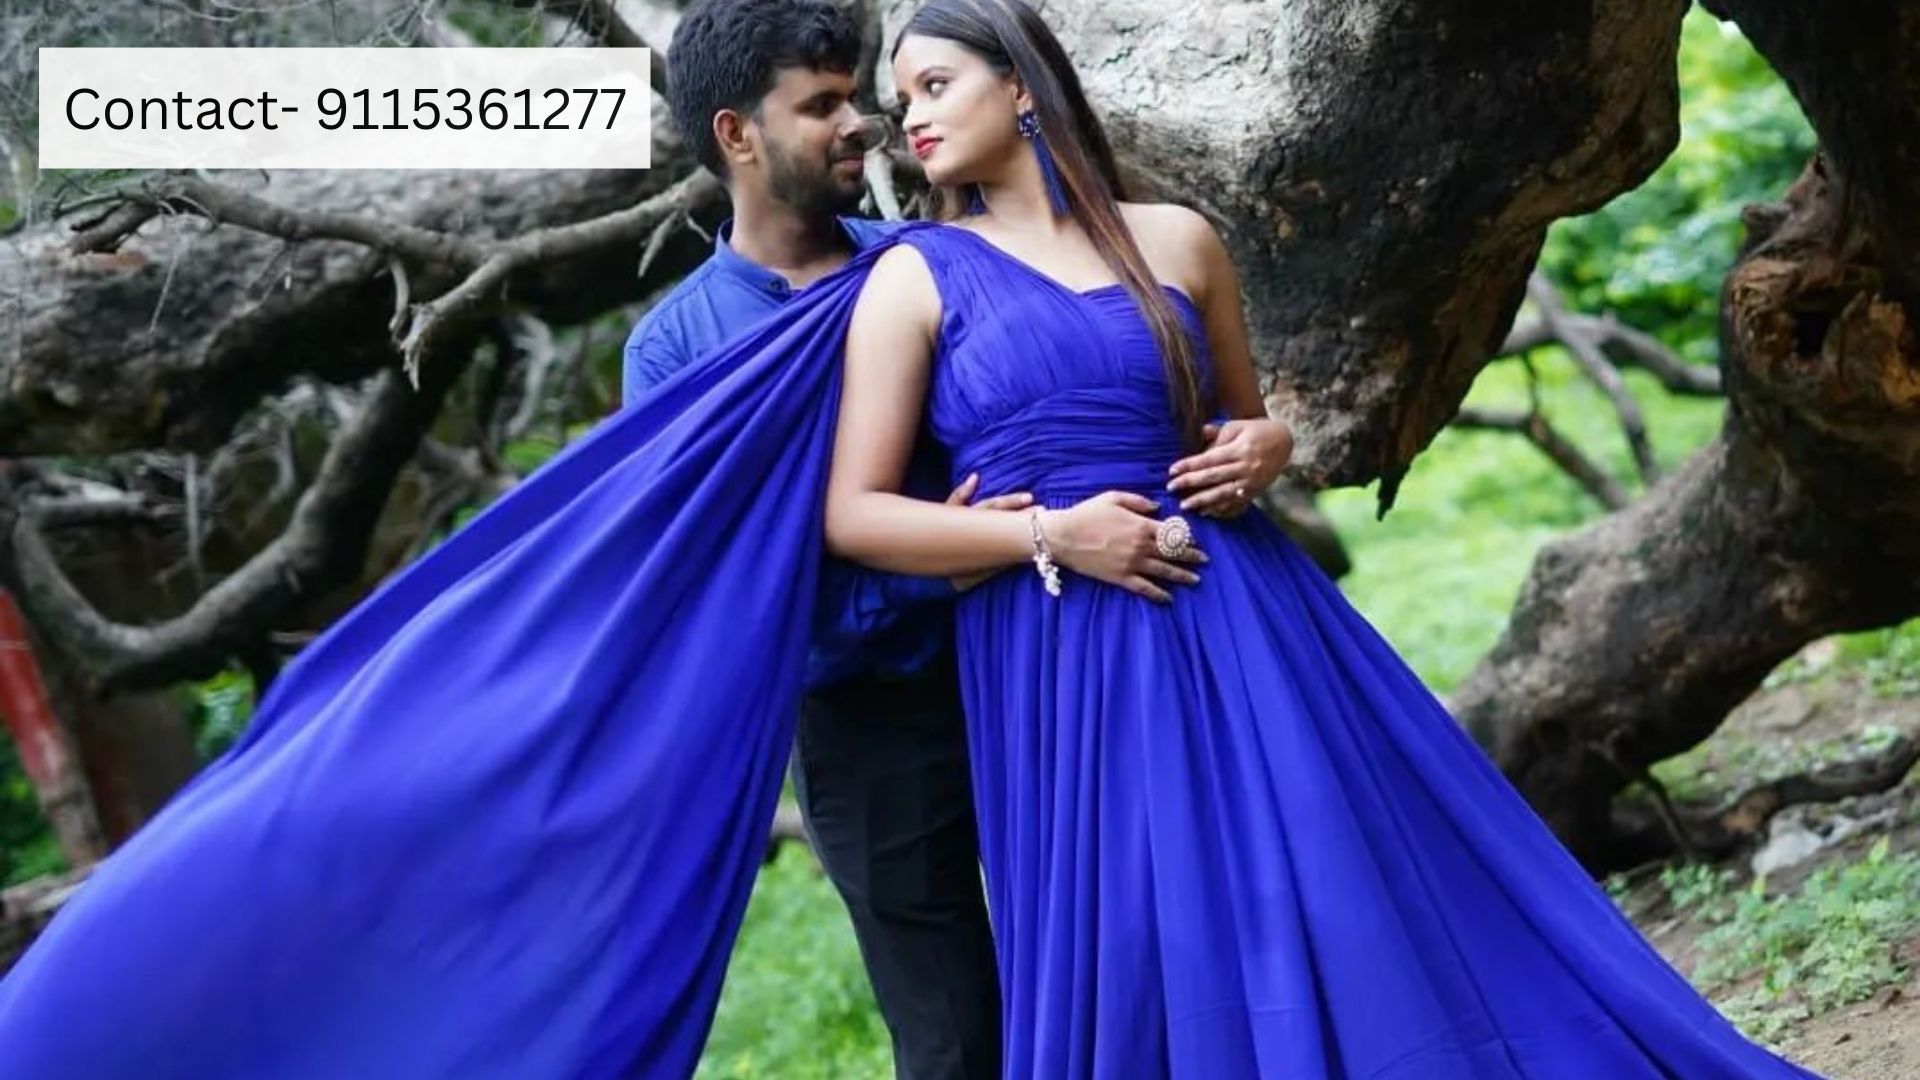 Pre-wedding Shoot Costumes For Rent